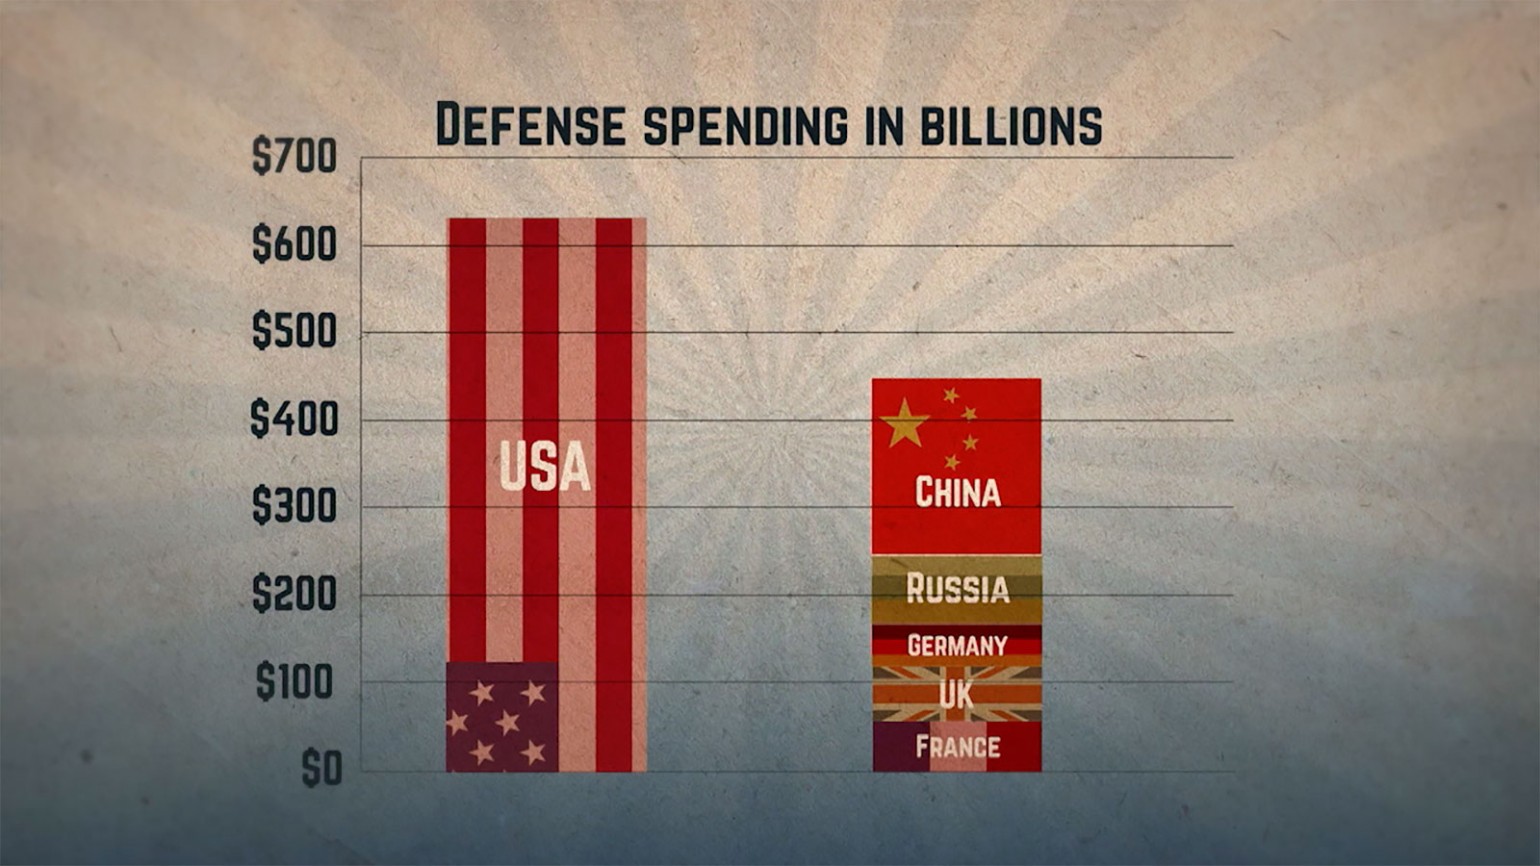 Table showing defense spending in billions of the USA compared to other countries. Photo courtesy of James Shelley.